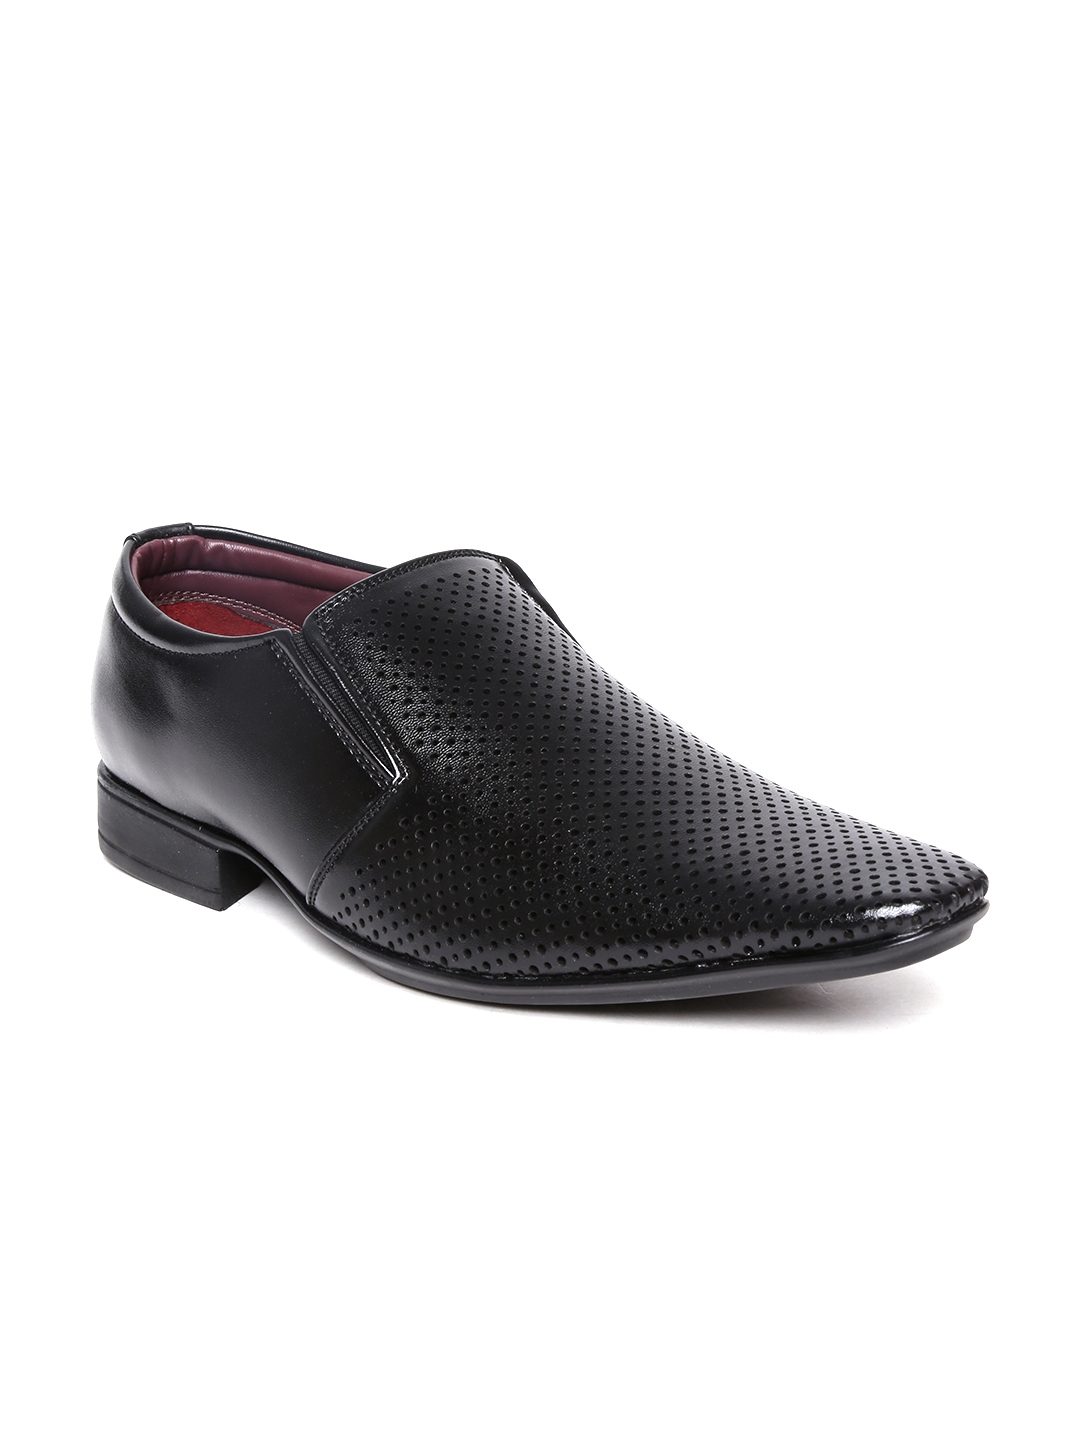 footin mens formal shoes